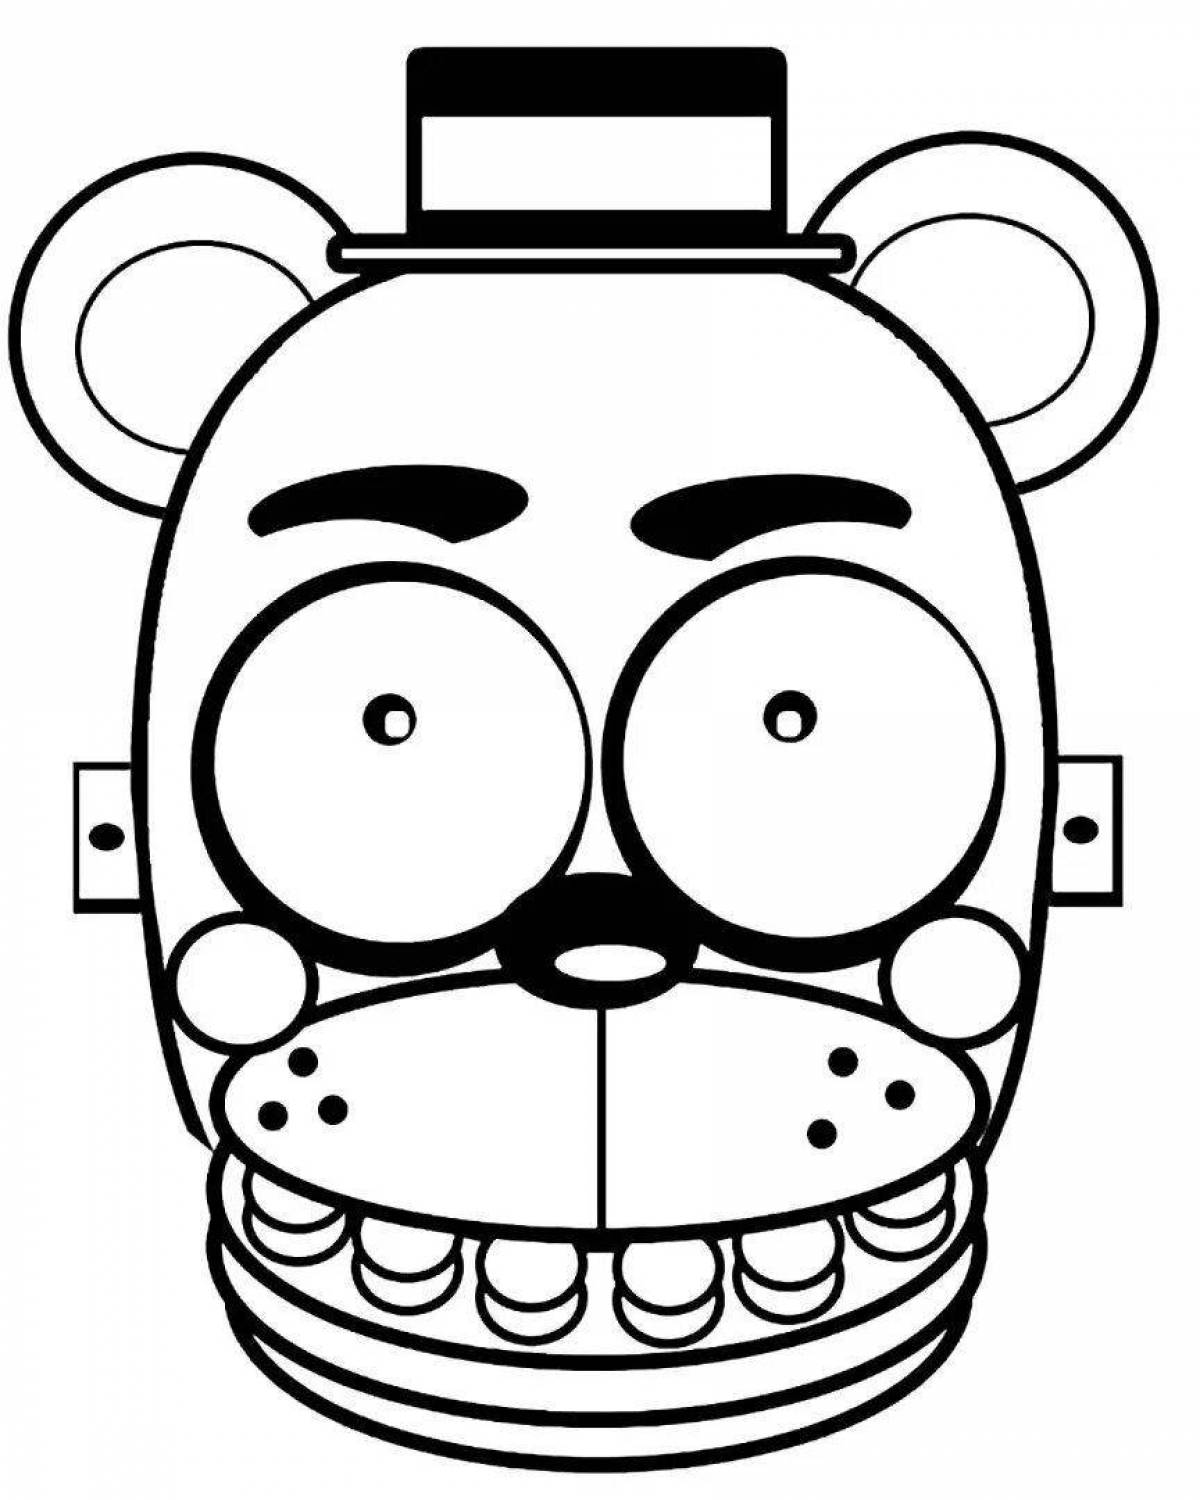 Marvelous freddy bear coloring pages for kids